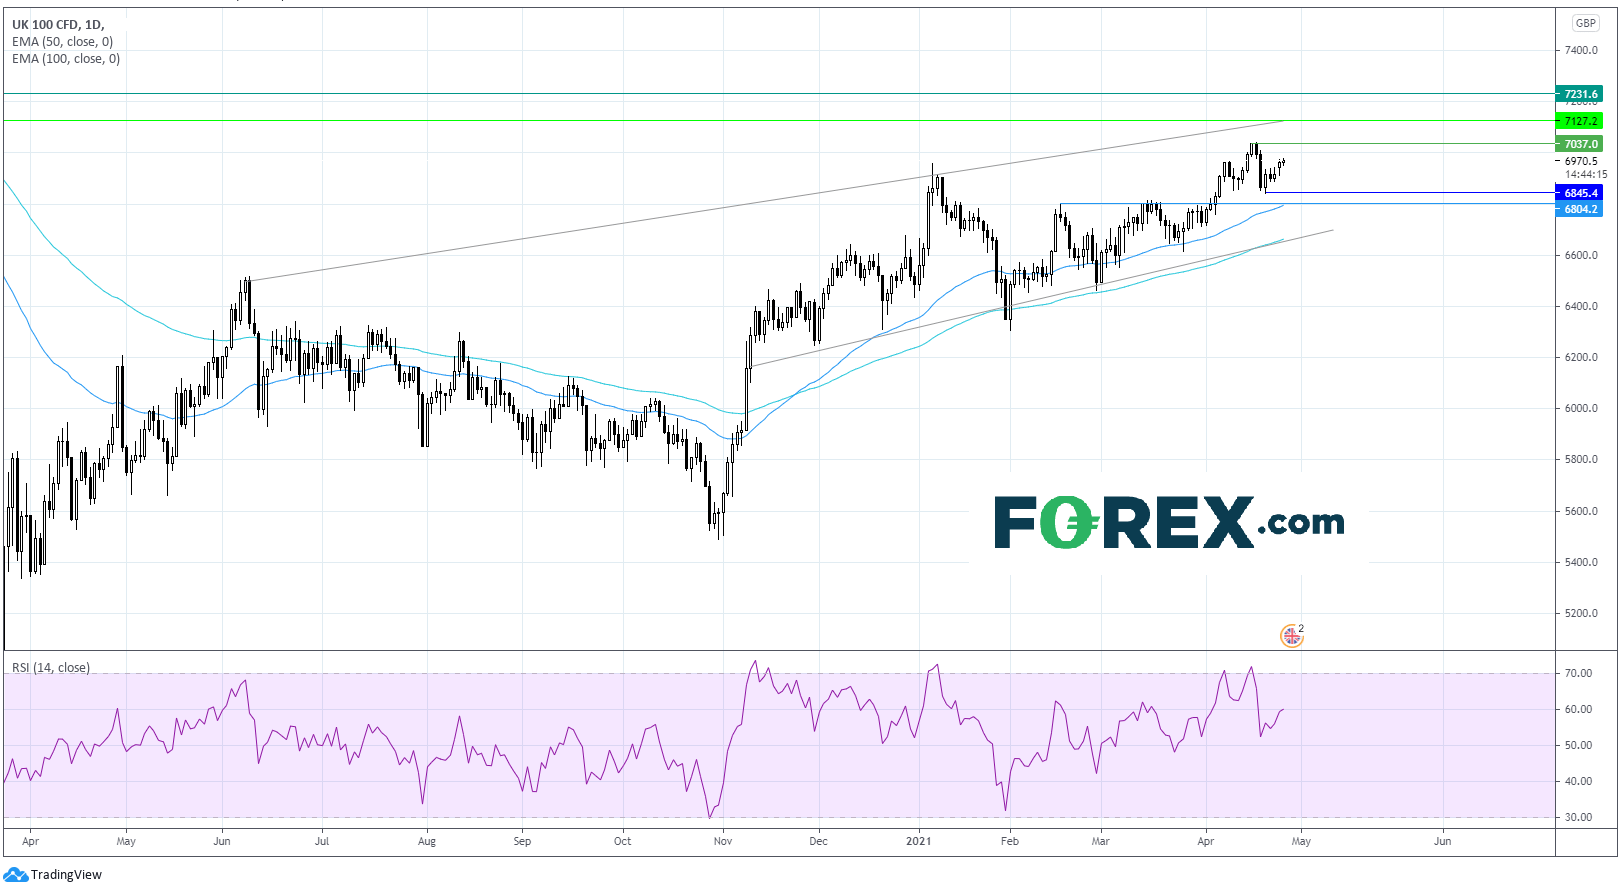 Chart analysis of FTSE. Published in April 2021 by FOREX.com